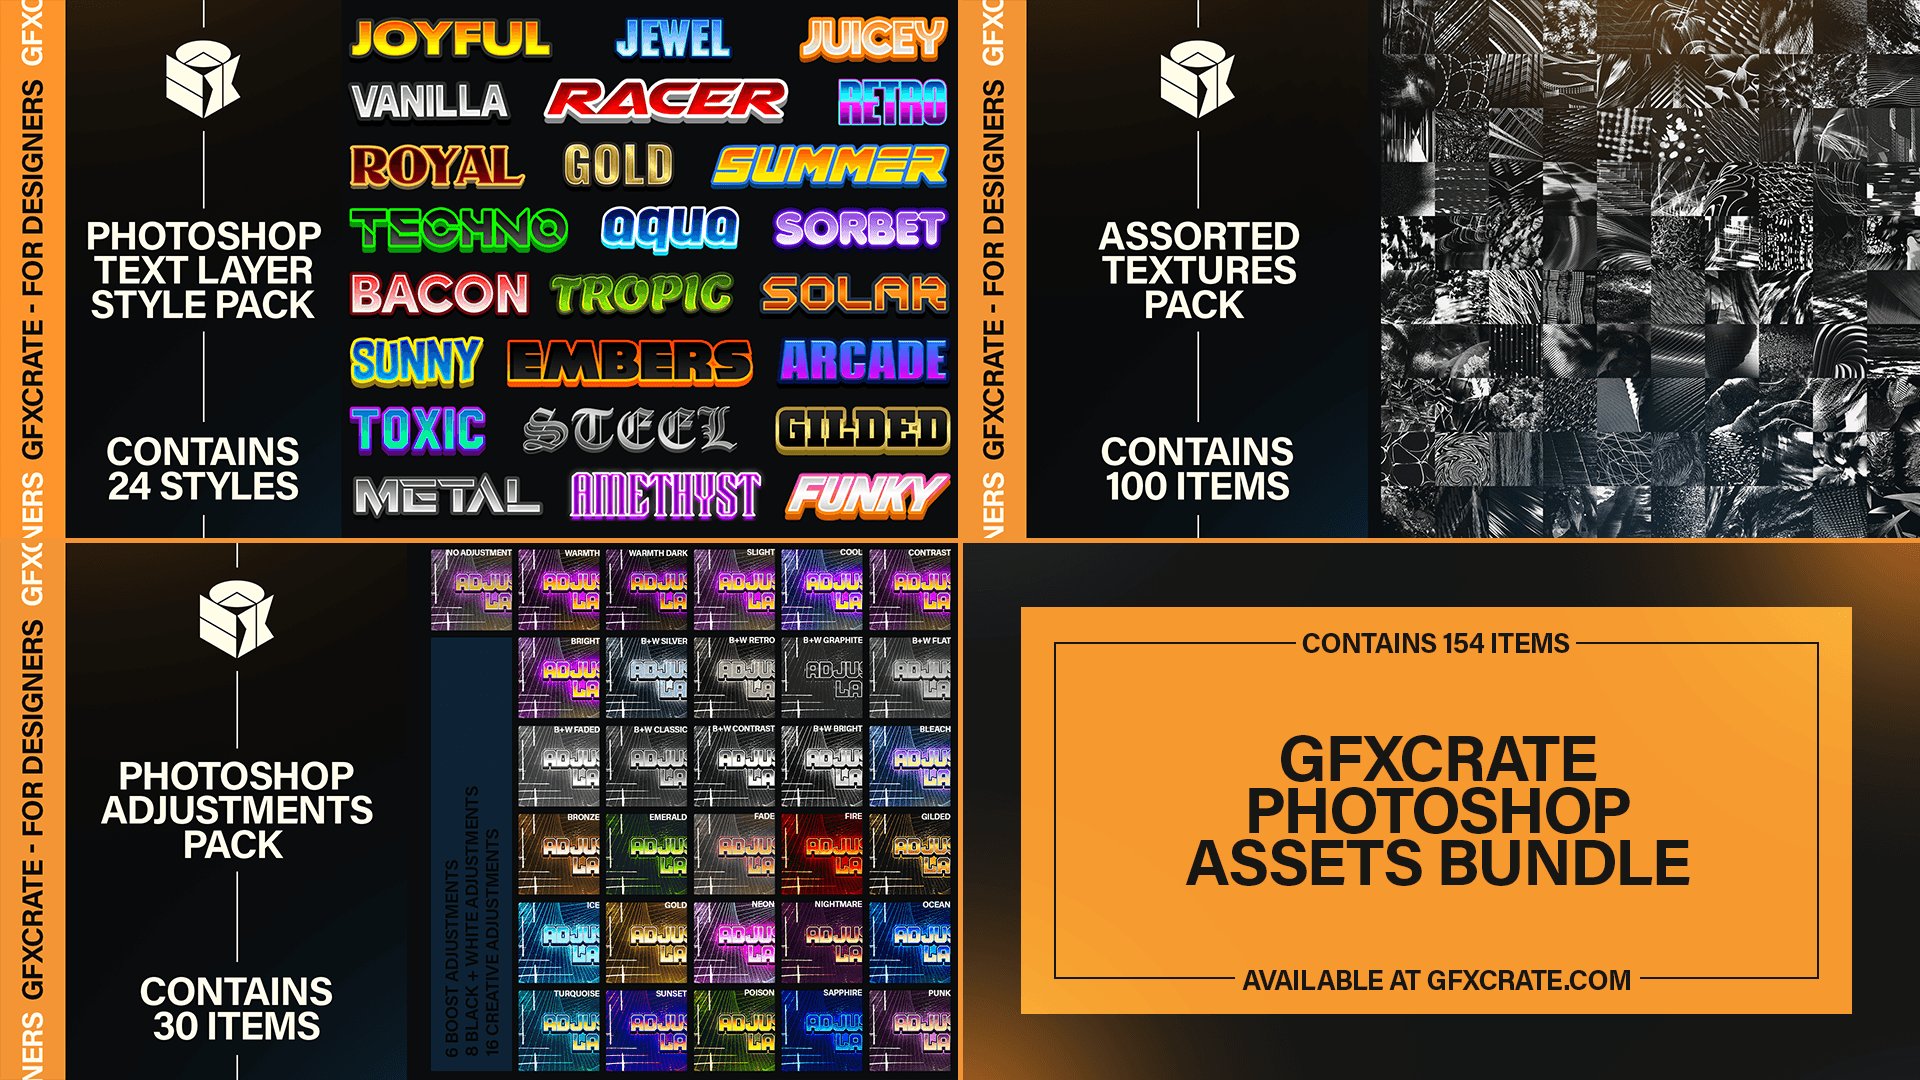 Photoshop Assets Bundle With Over 150 Layer Styles, Textures and Effects - GFXCRATE